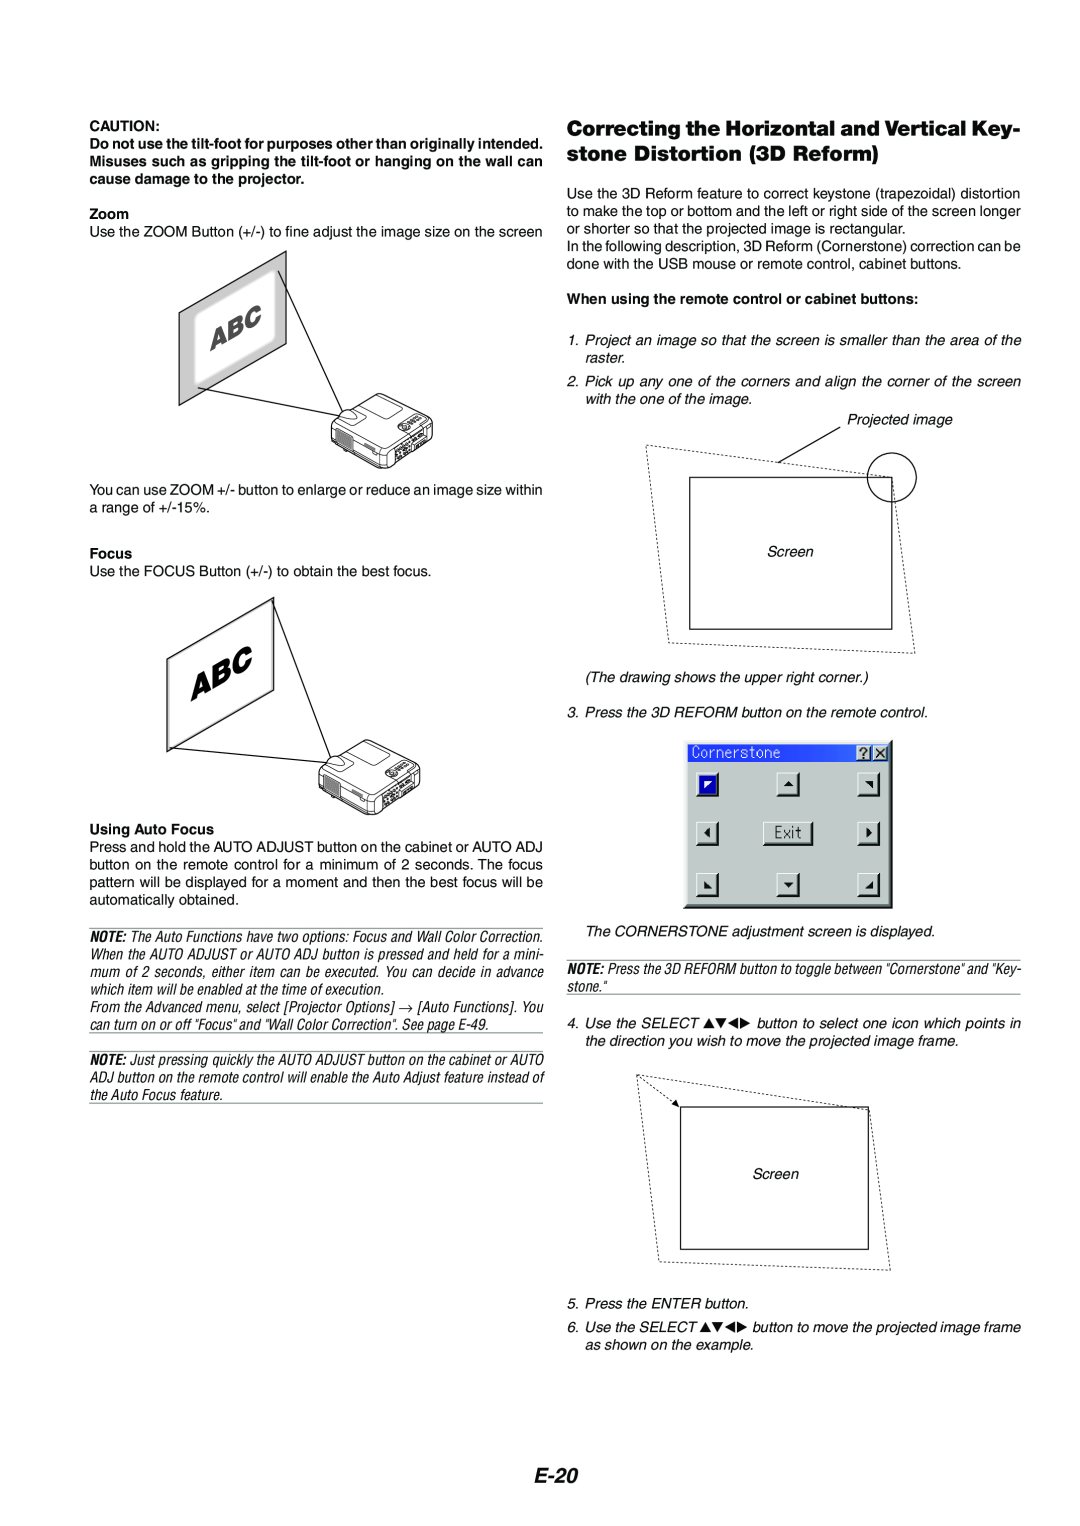 NEC MT1075/MT1065 user manual E-20, Zoom, When using the remote control or cabinet buttons, Using Auto Focus 